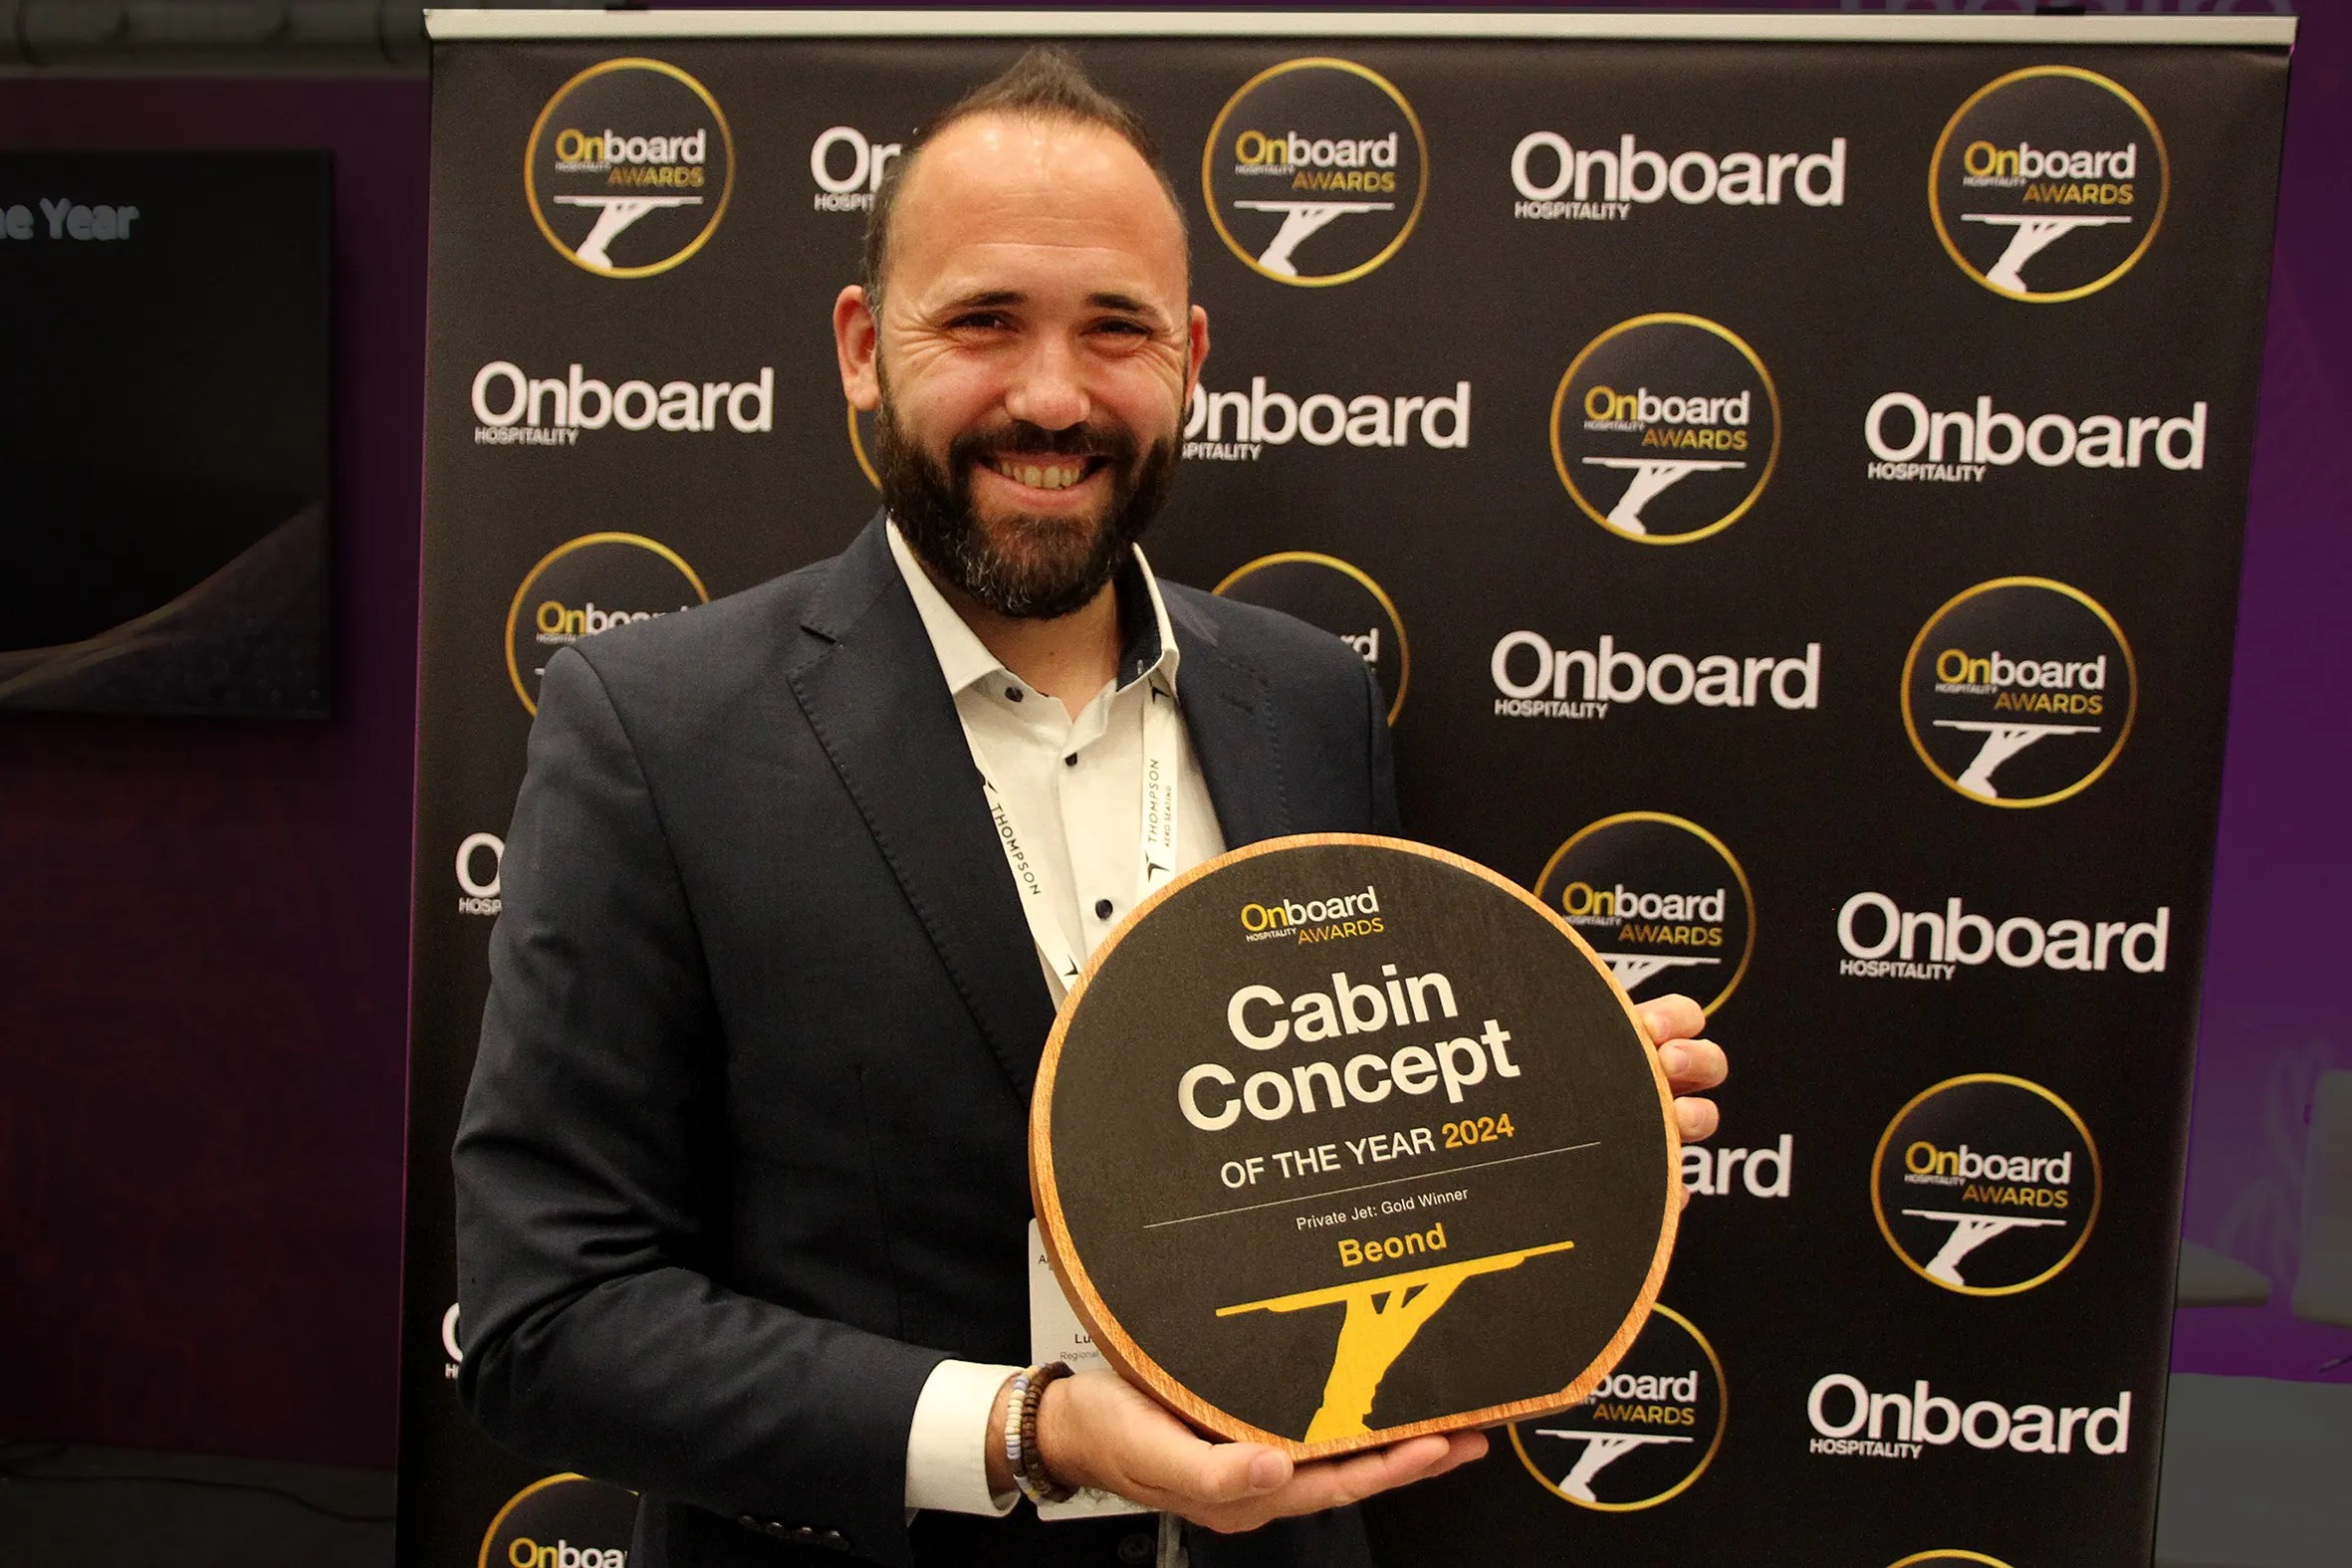 beOnd's head of sales in Europe, Lukas Hofmeister accepts the Cabin Concept of the Year award in Germany.